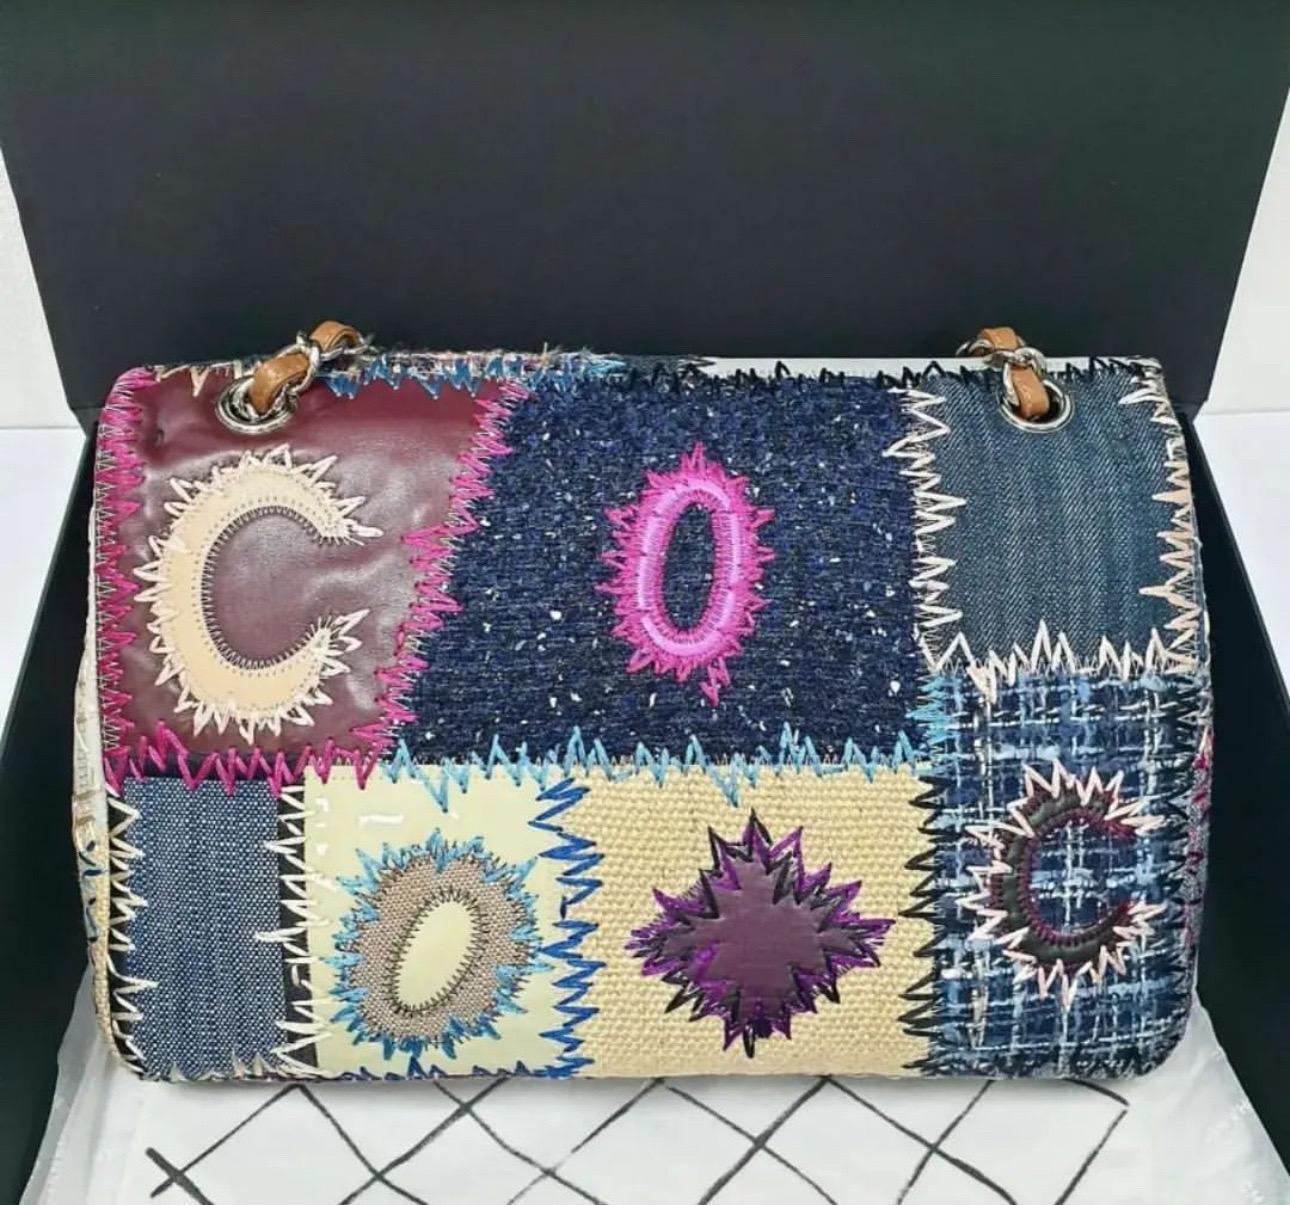 This might be one of our favorite limited edition Chanel bags of all time. From the 2011 Cruise collection, this is definitely a one of a kind look! Adorned with tweed, raffia, plaid fabric, and leather, this creative a quirky collectible has bold